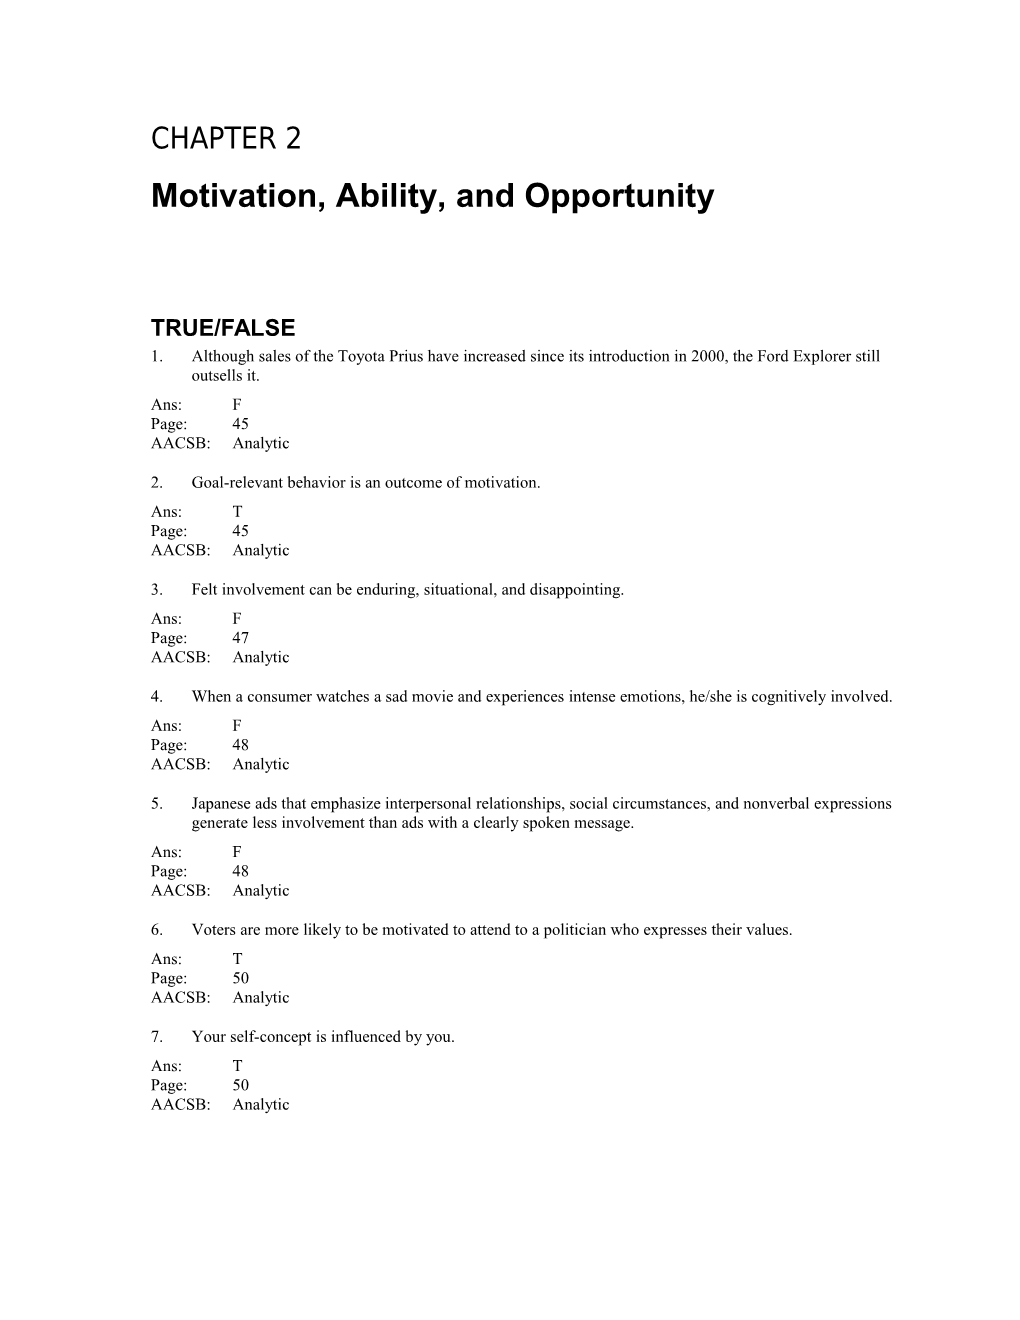 Motivation, Ability, and Opportunity